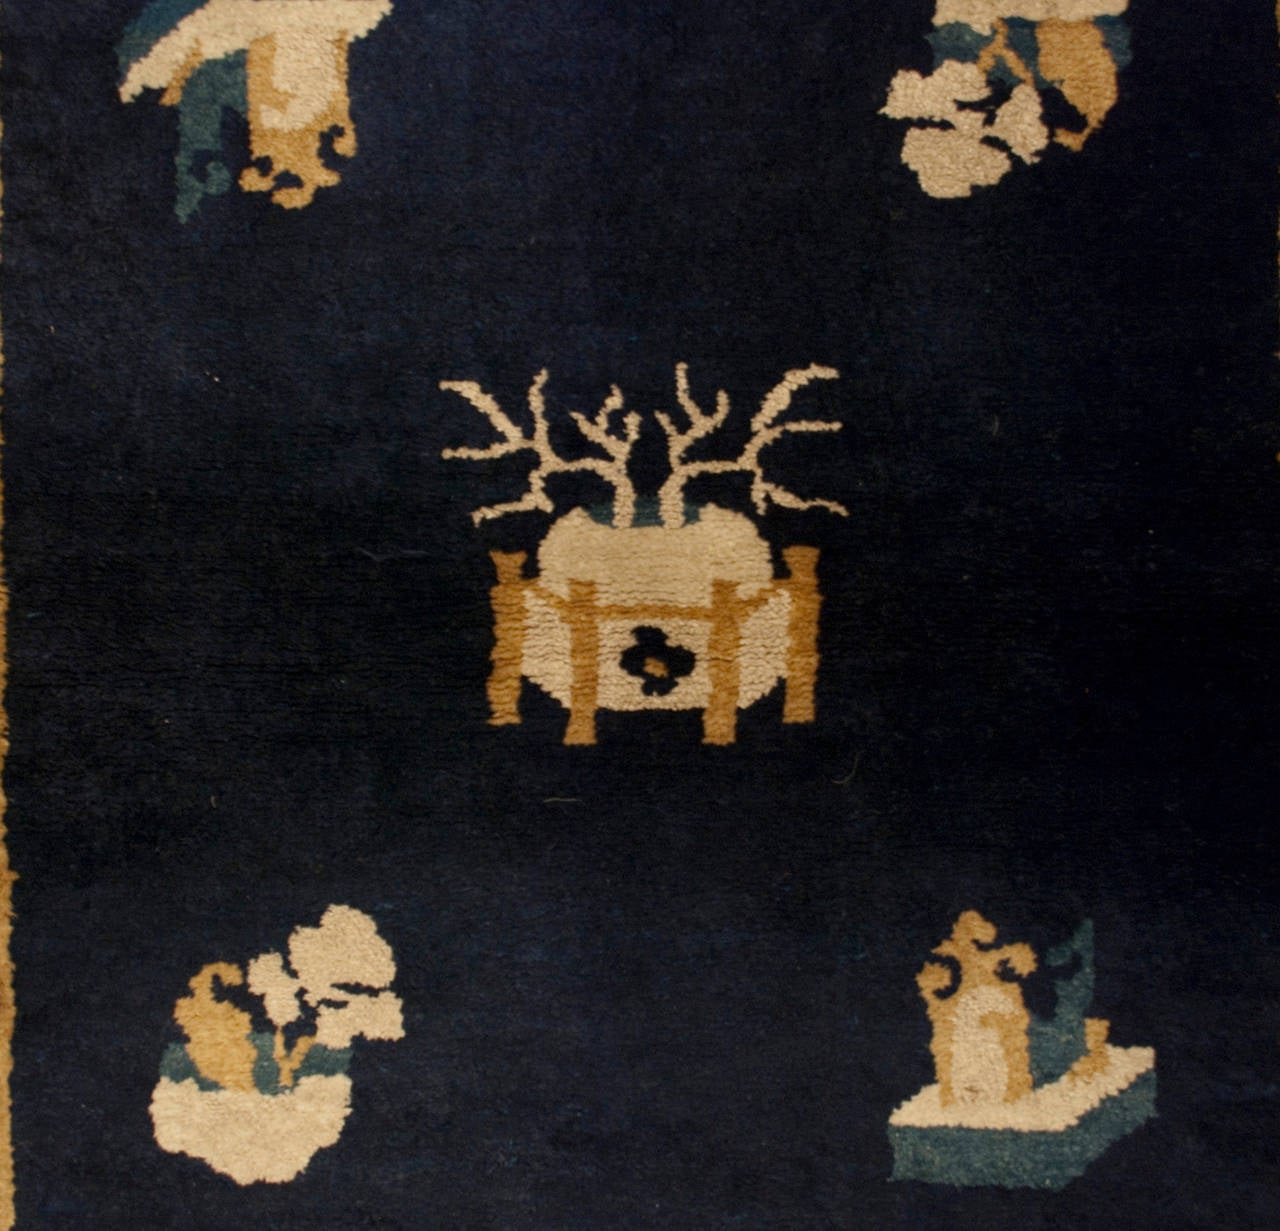 An early 20th century Chinese Peking rug with scholar's objects amidst a beautiful indigo background, surrounded by a contrasting beige border with potted flowers and other scholar's objects.